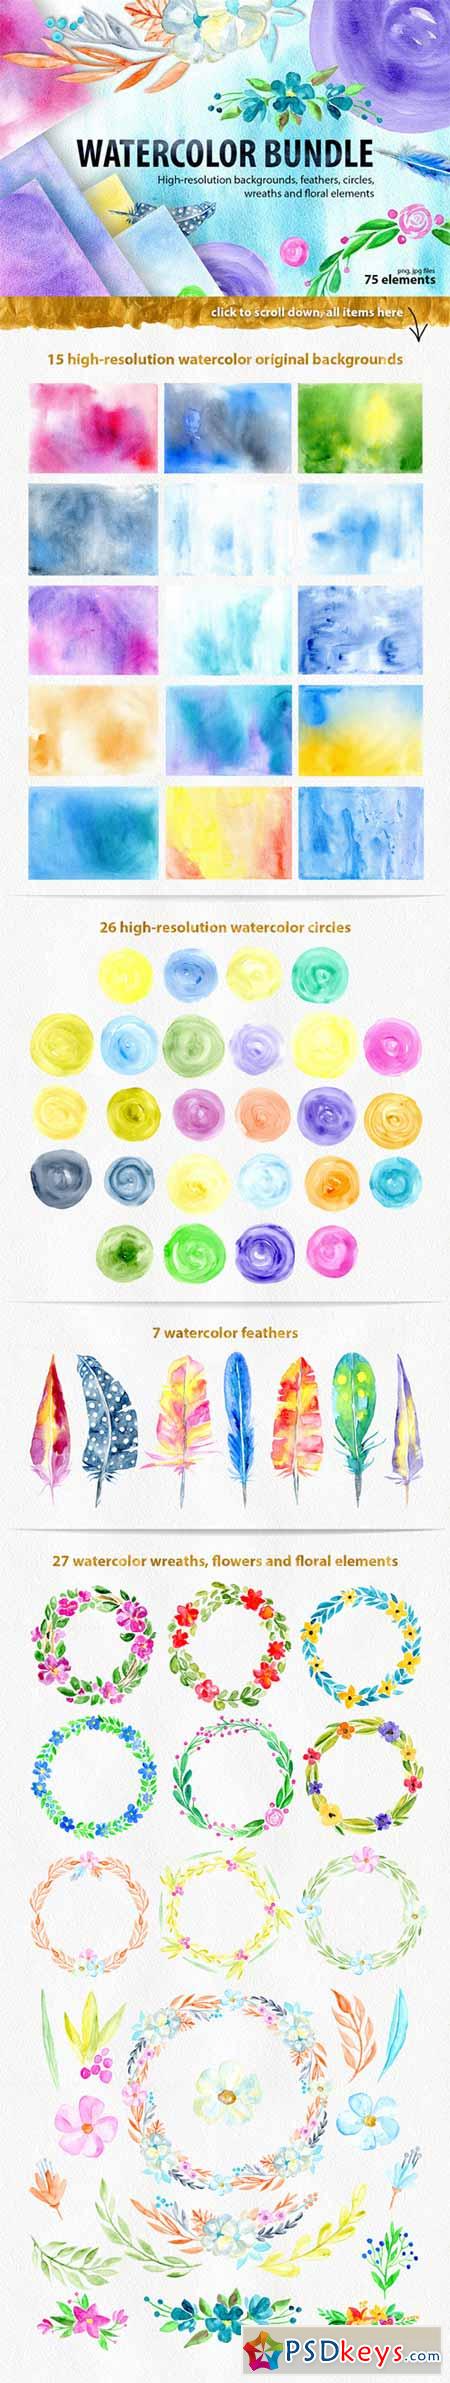 Watercolor bundle textures and more 547726